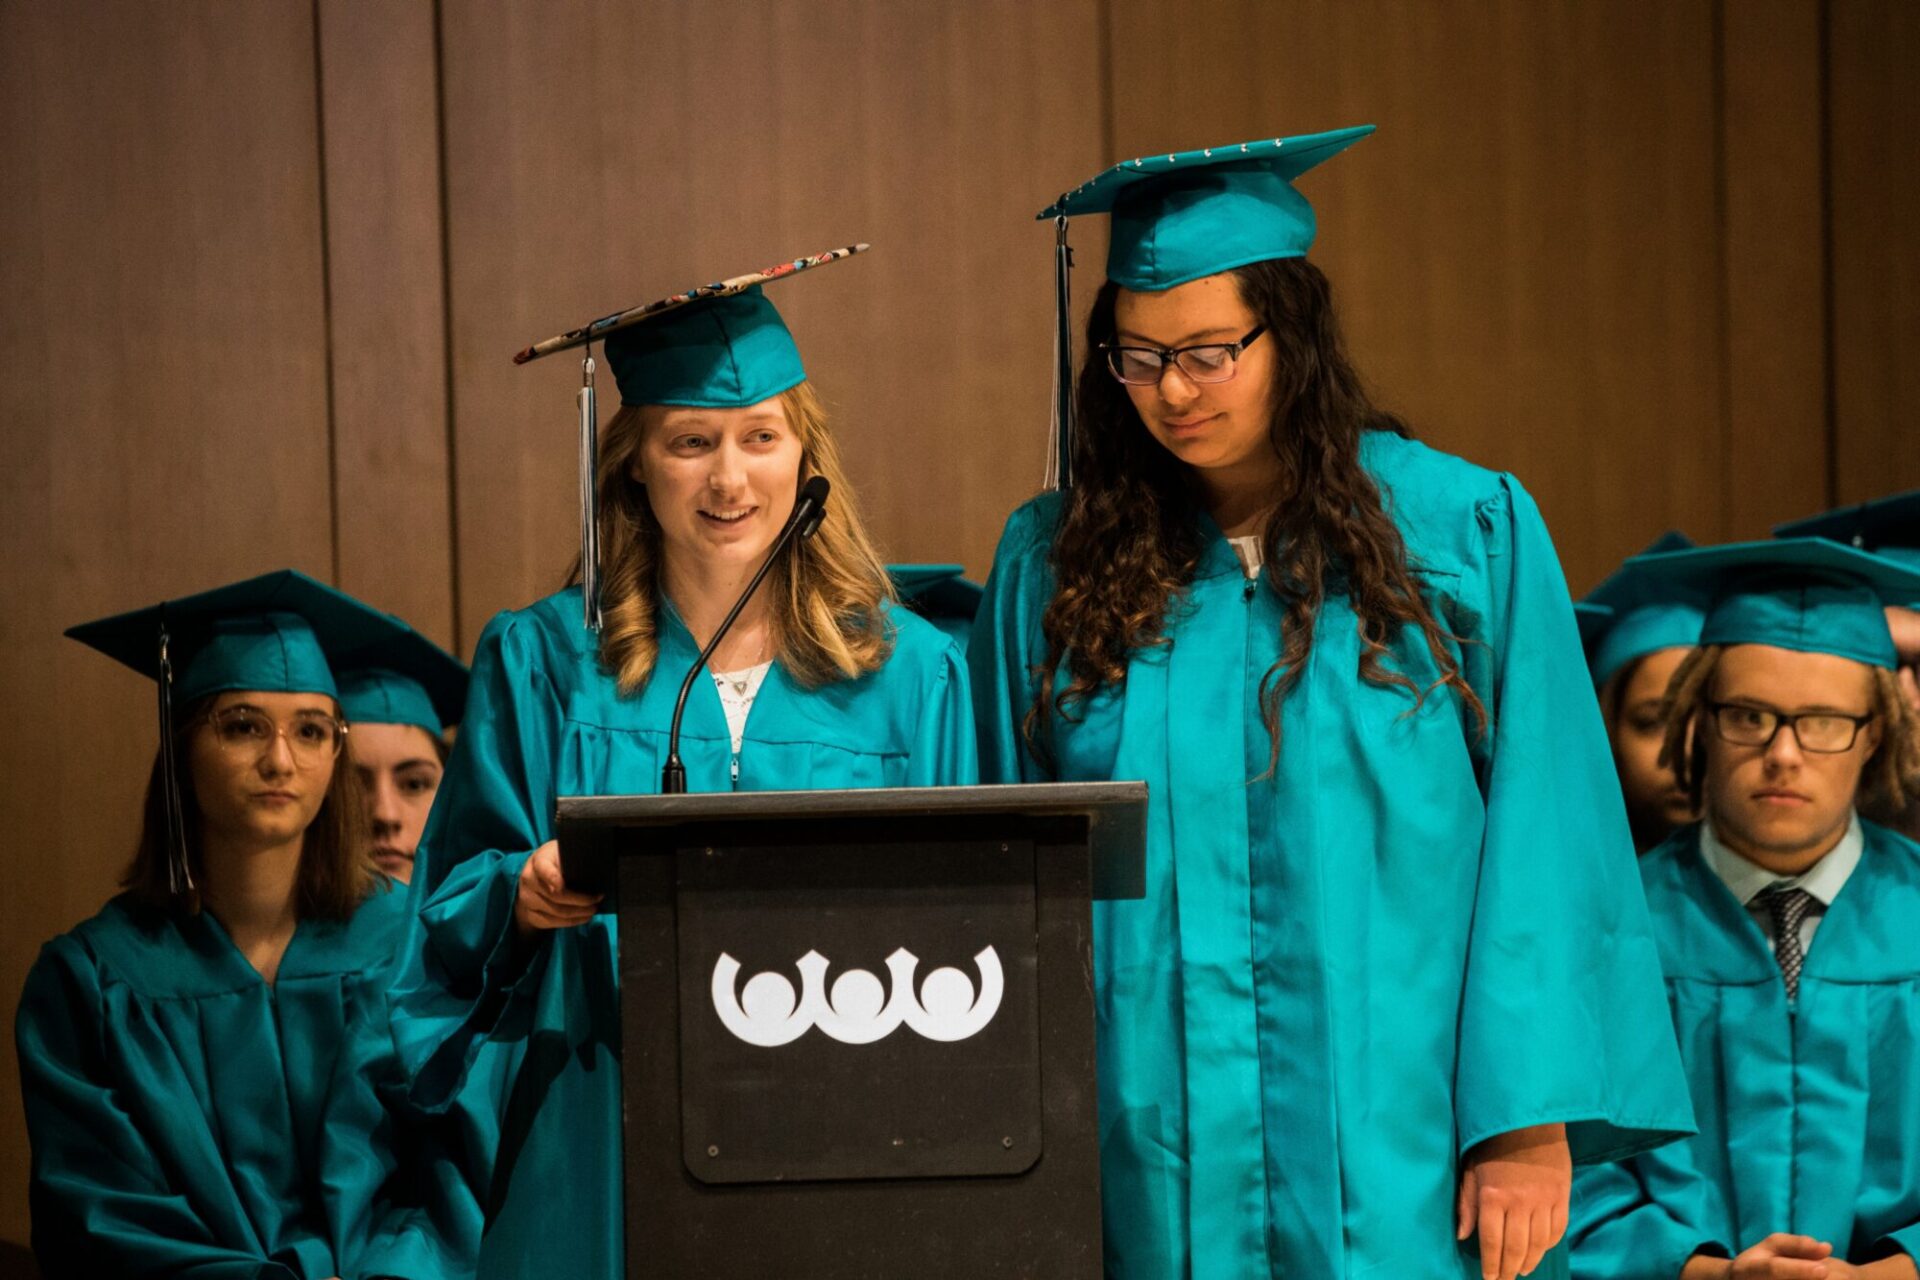 Graduates speaking at a lectern in front of the audience